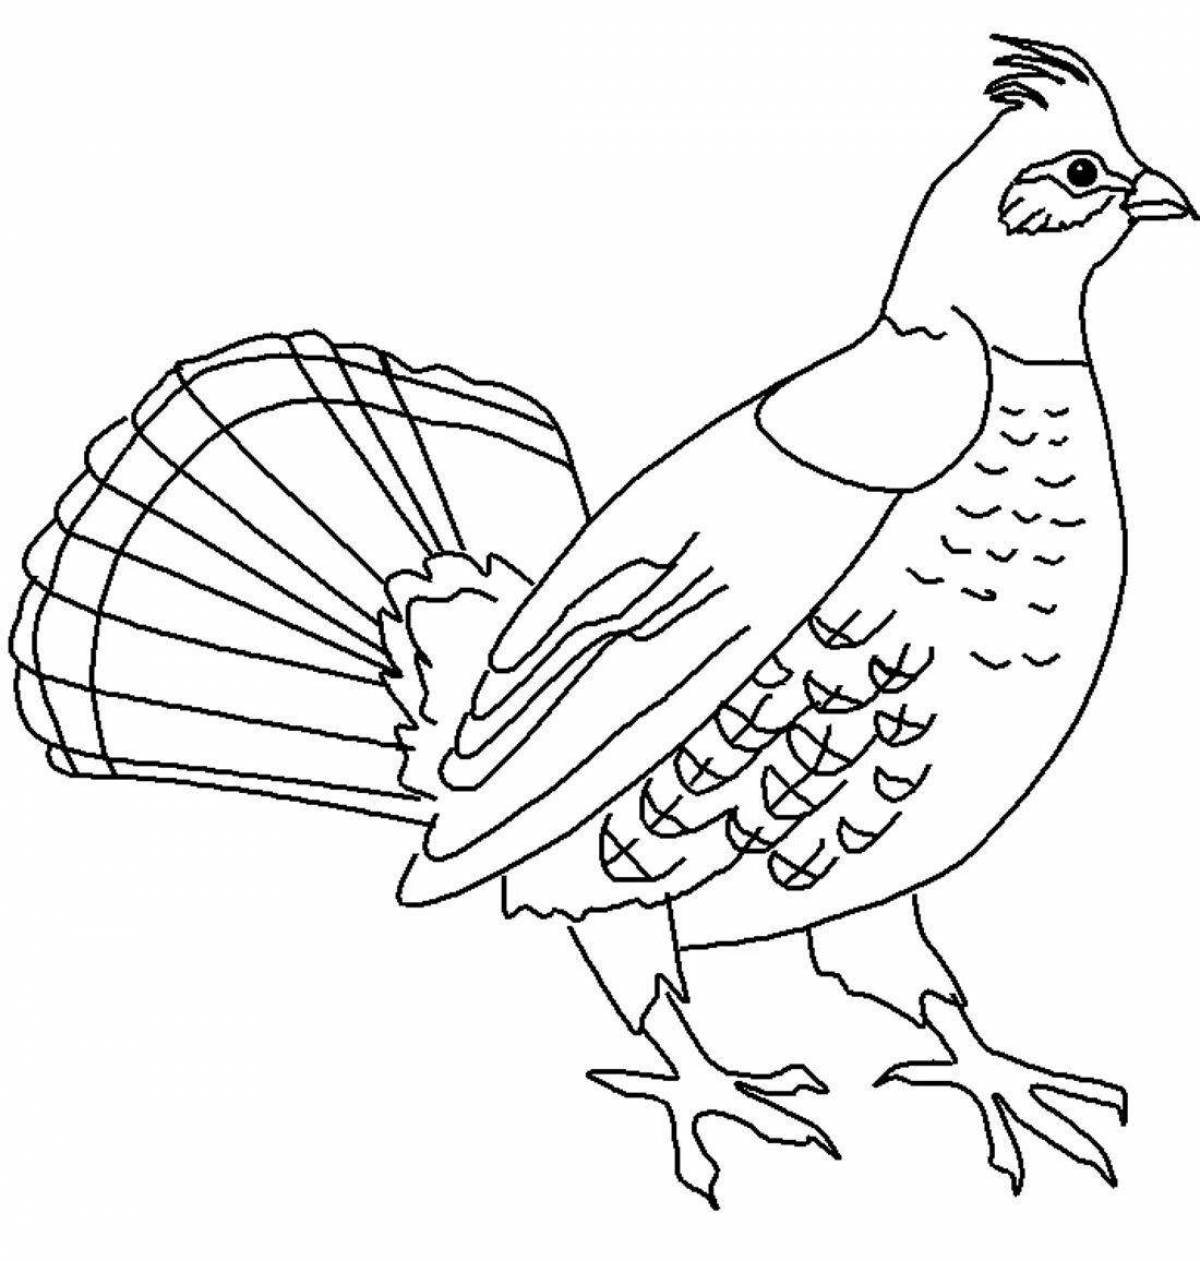 Fun coloring book for kids with black grouse